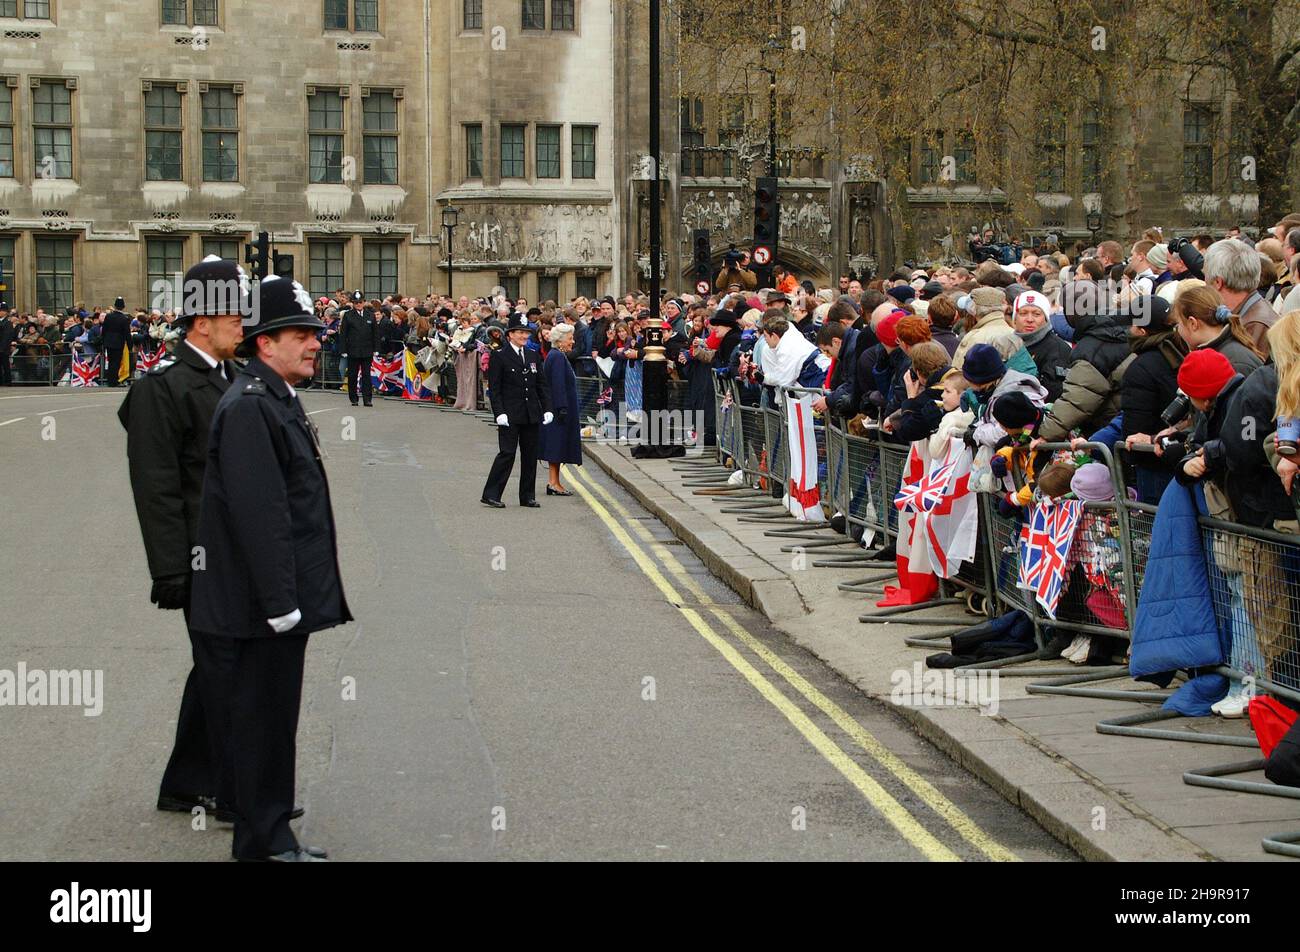 Police Officers Watching Spectators at the Funeral of HRH Queen Elizabeth the Queen Mother, London, April 9 2002 Stock Photo